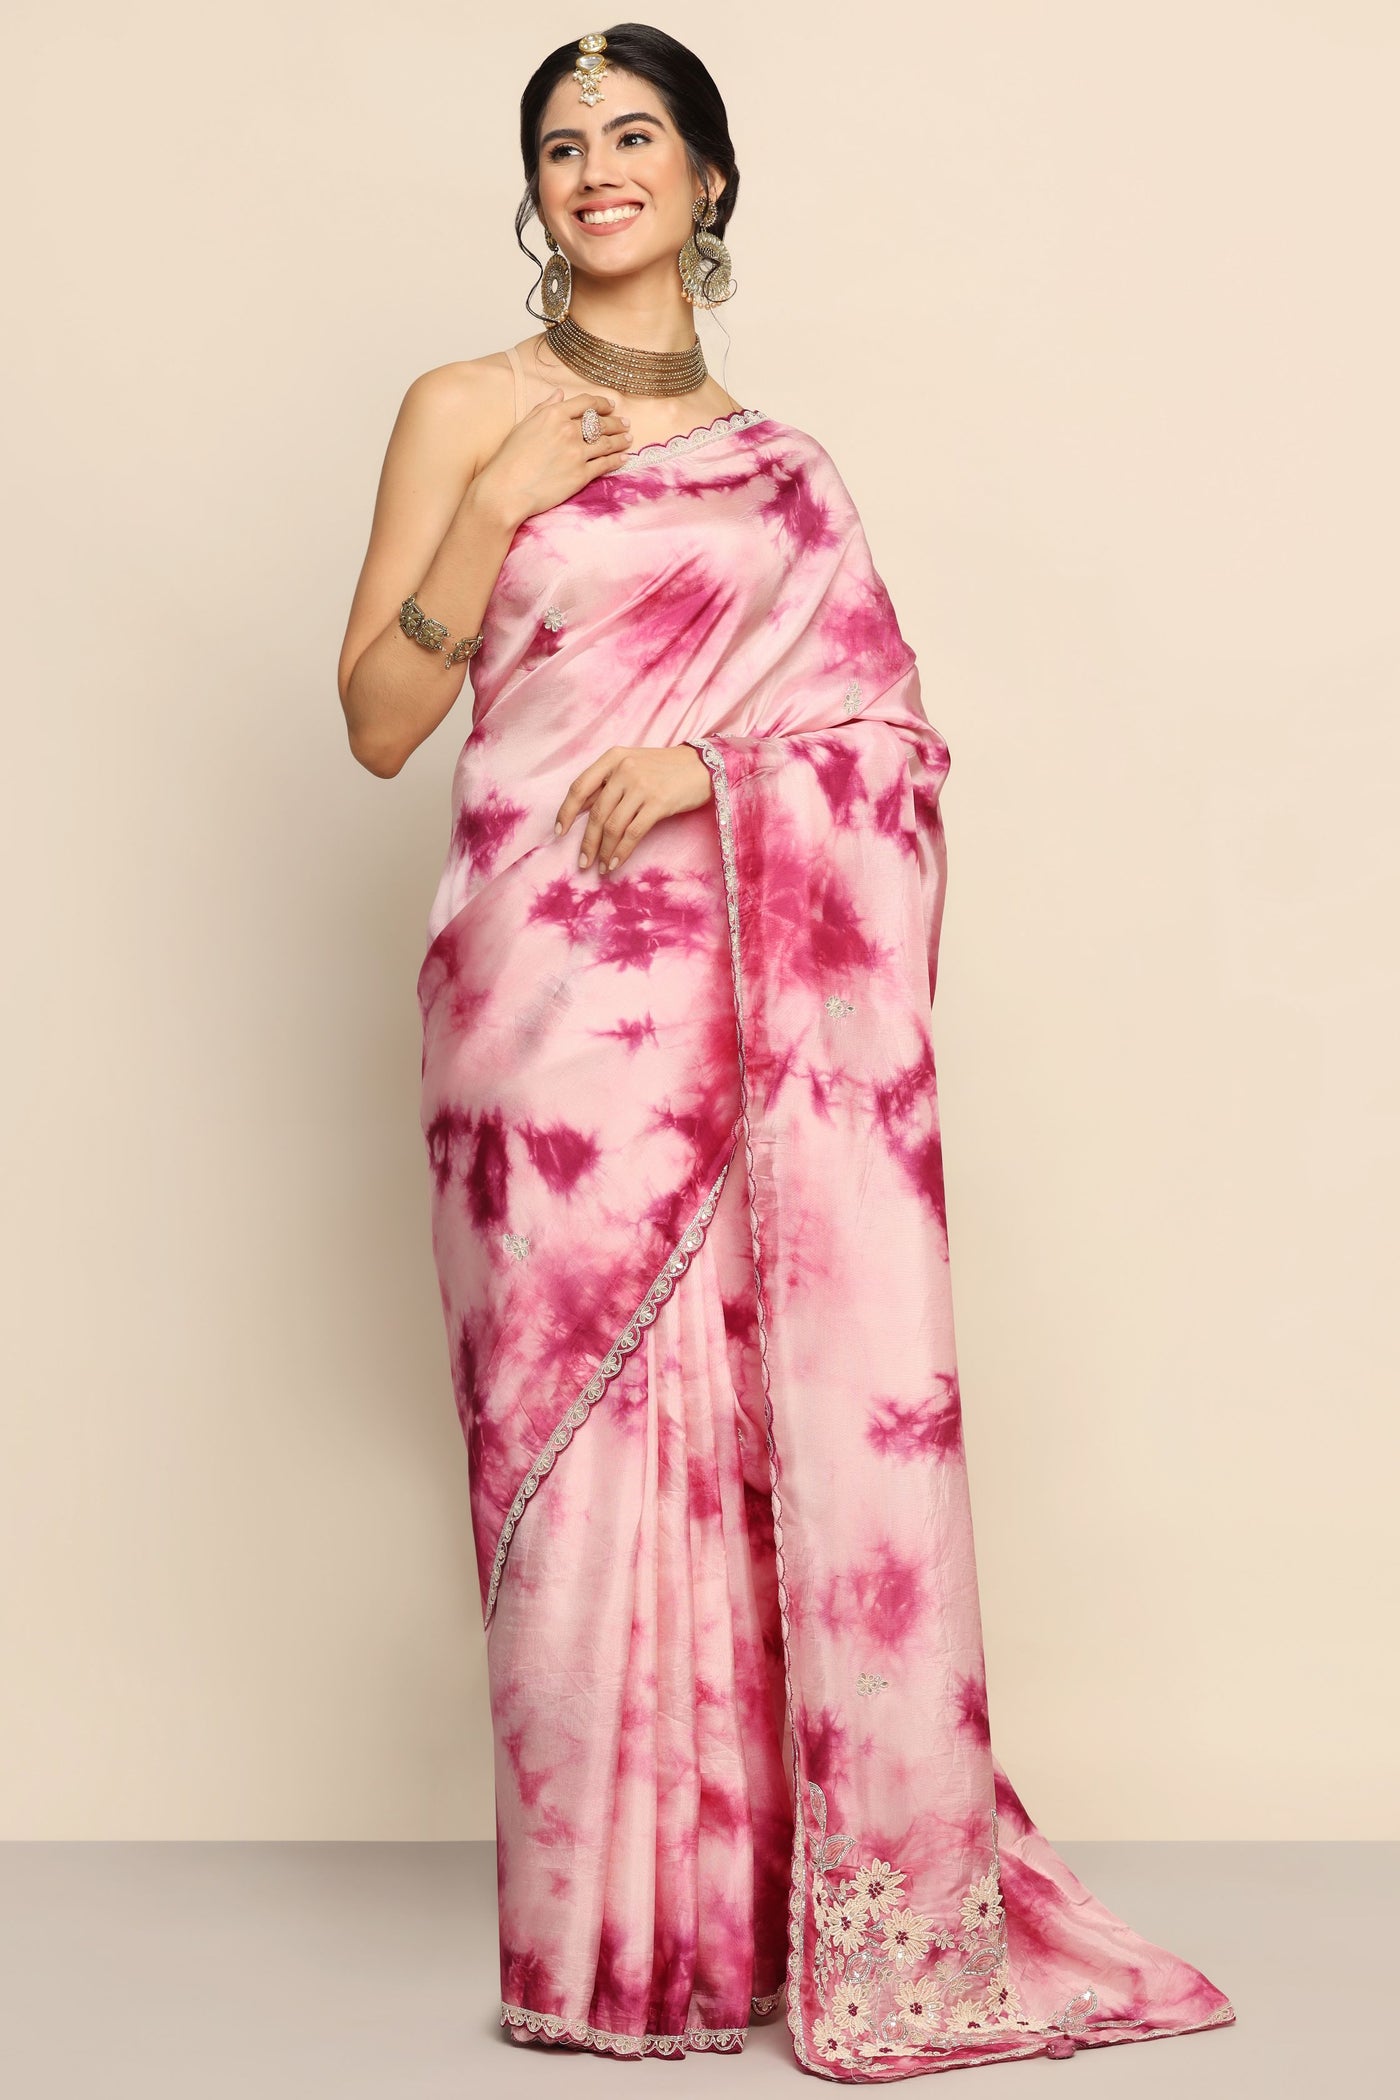 Samridhi Dhillon In Lilac Tie Dye Ready To Wear Saree – LabelSwish